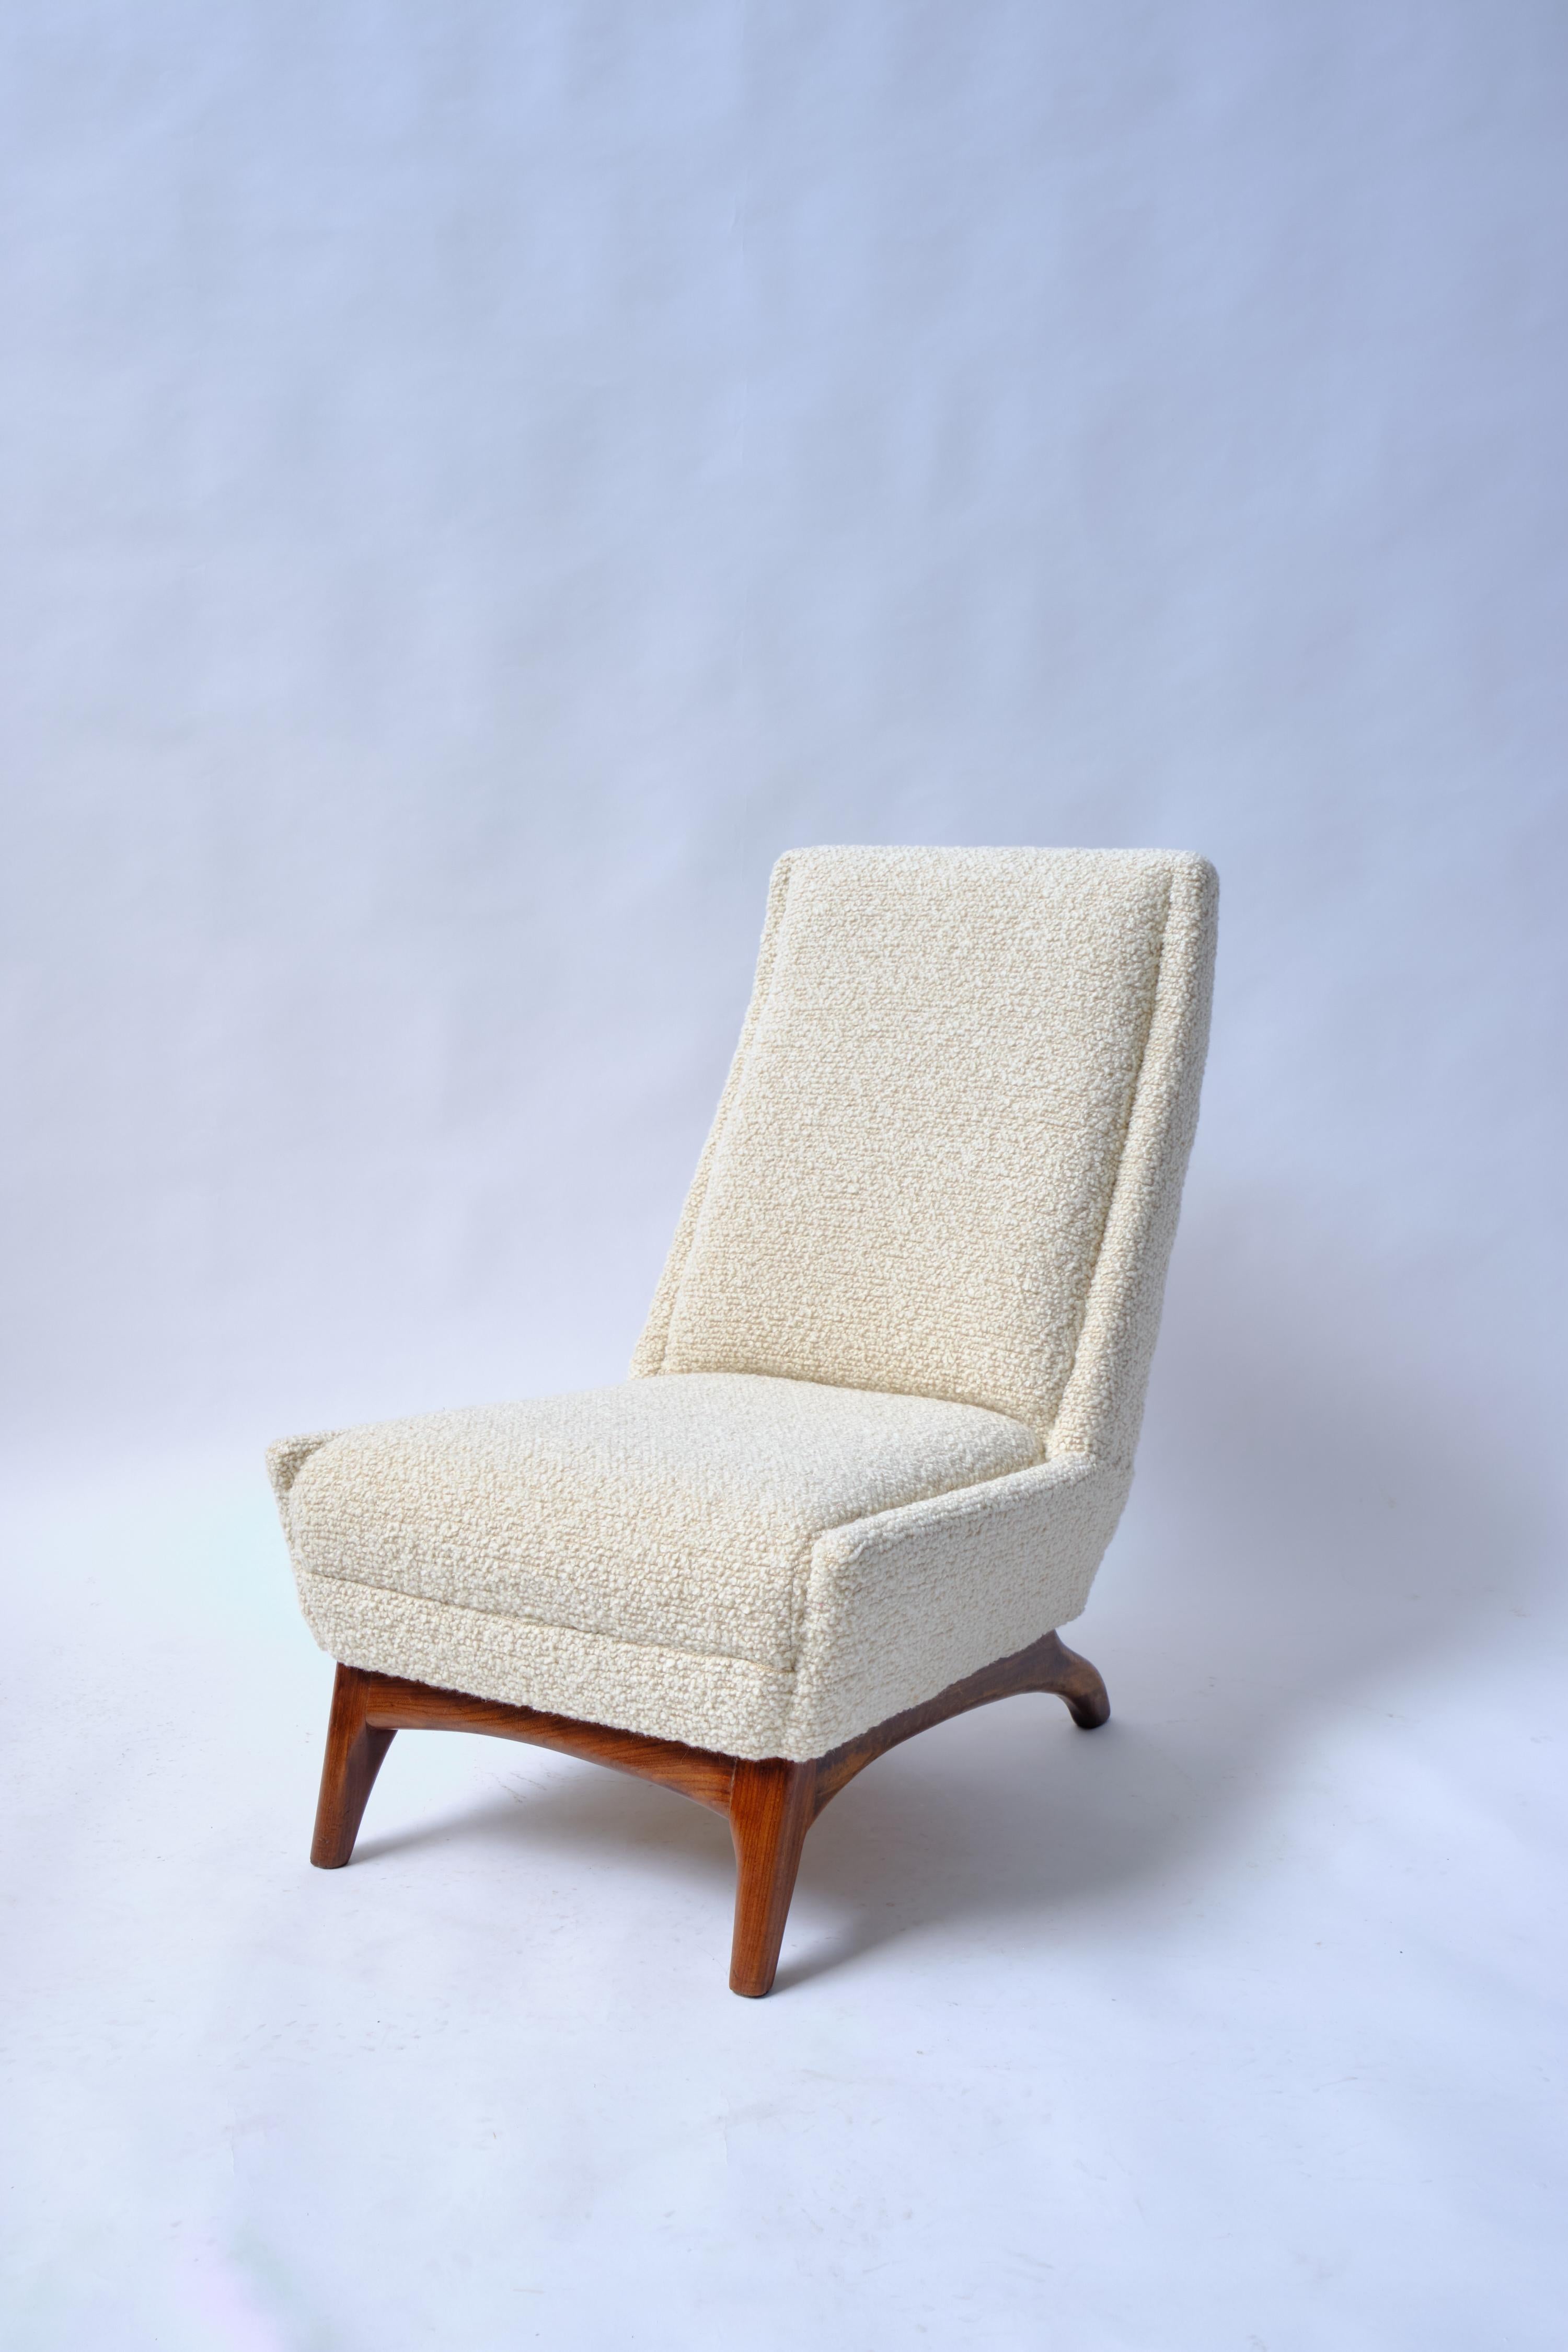 Midcentury Slipper chair.

Deco inspired Slipper Chair, with the ubiquitous low seat and tall back. Slipper chairs were originally produced in the 18th century for dressing the feet.These 20th Century versions are a much more paired down example,